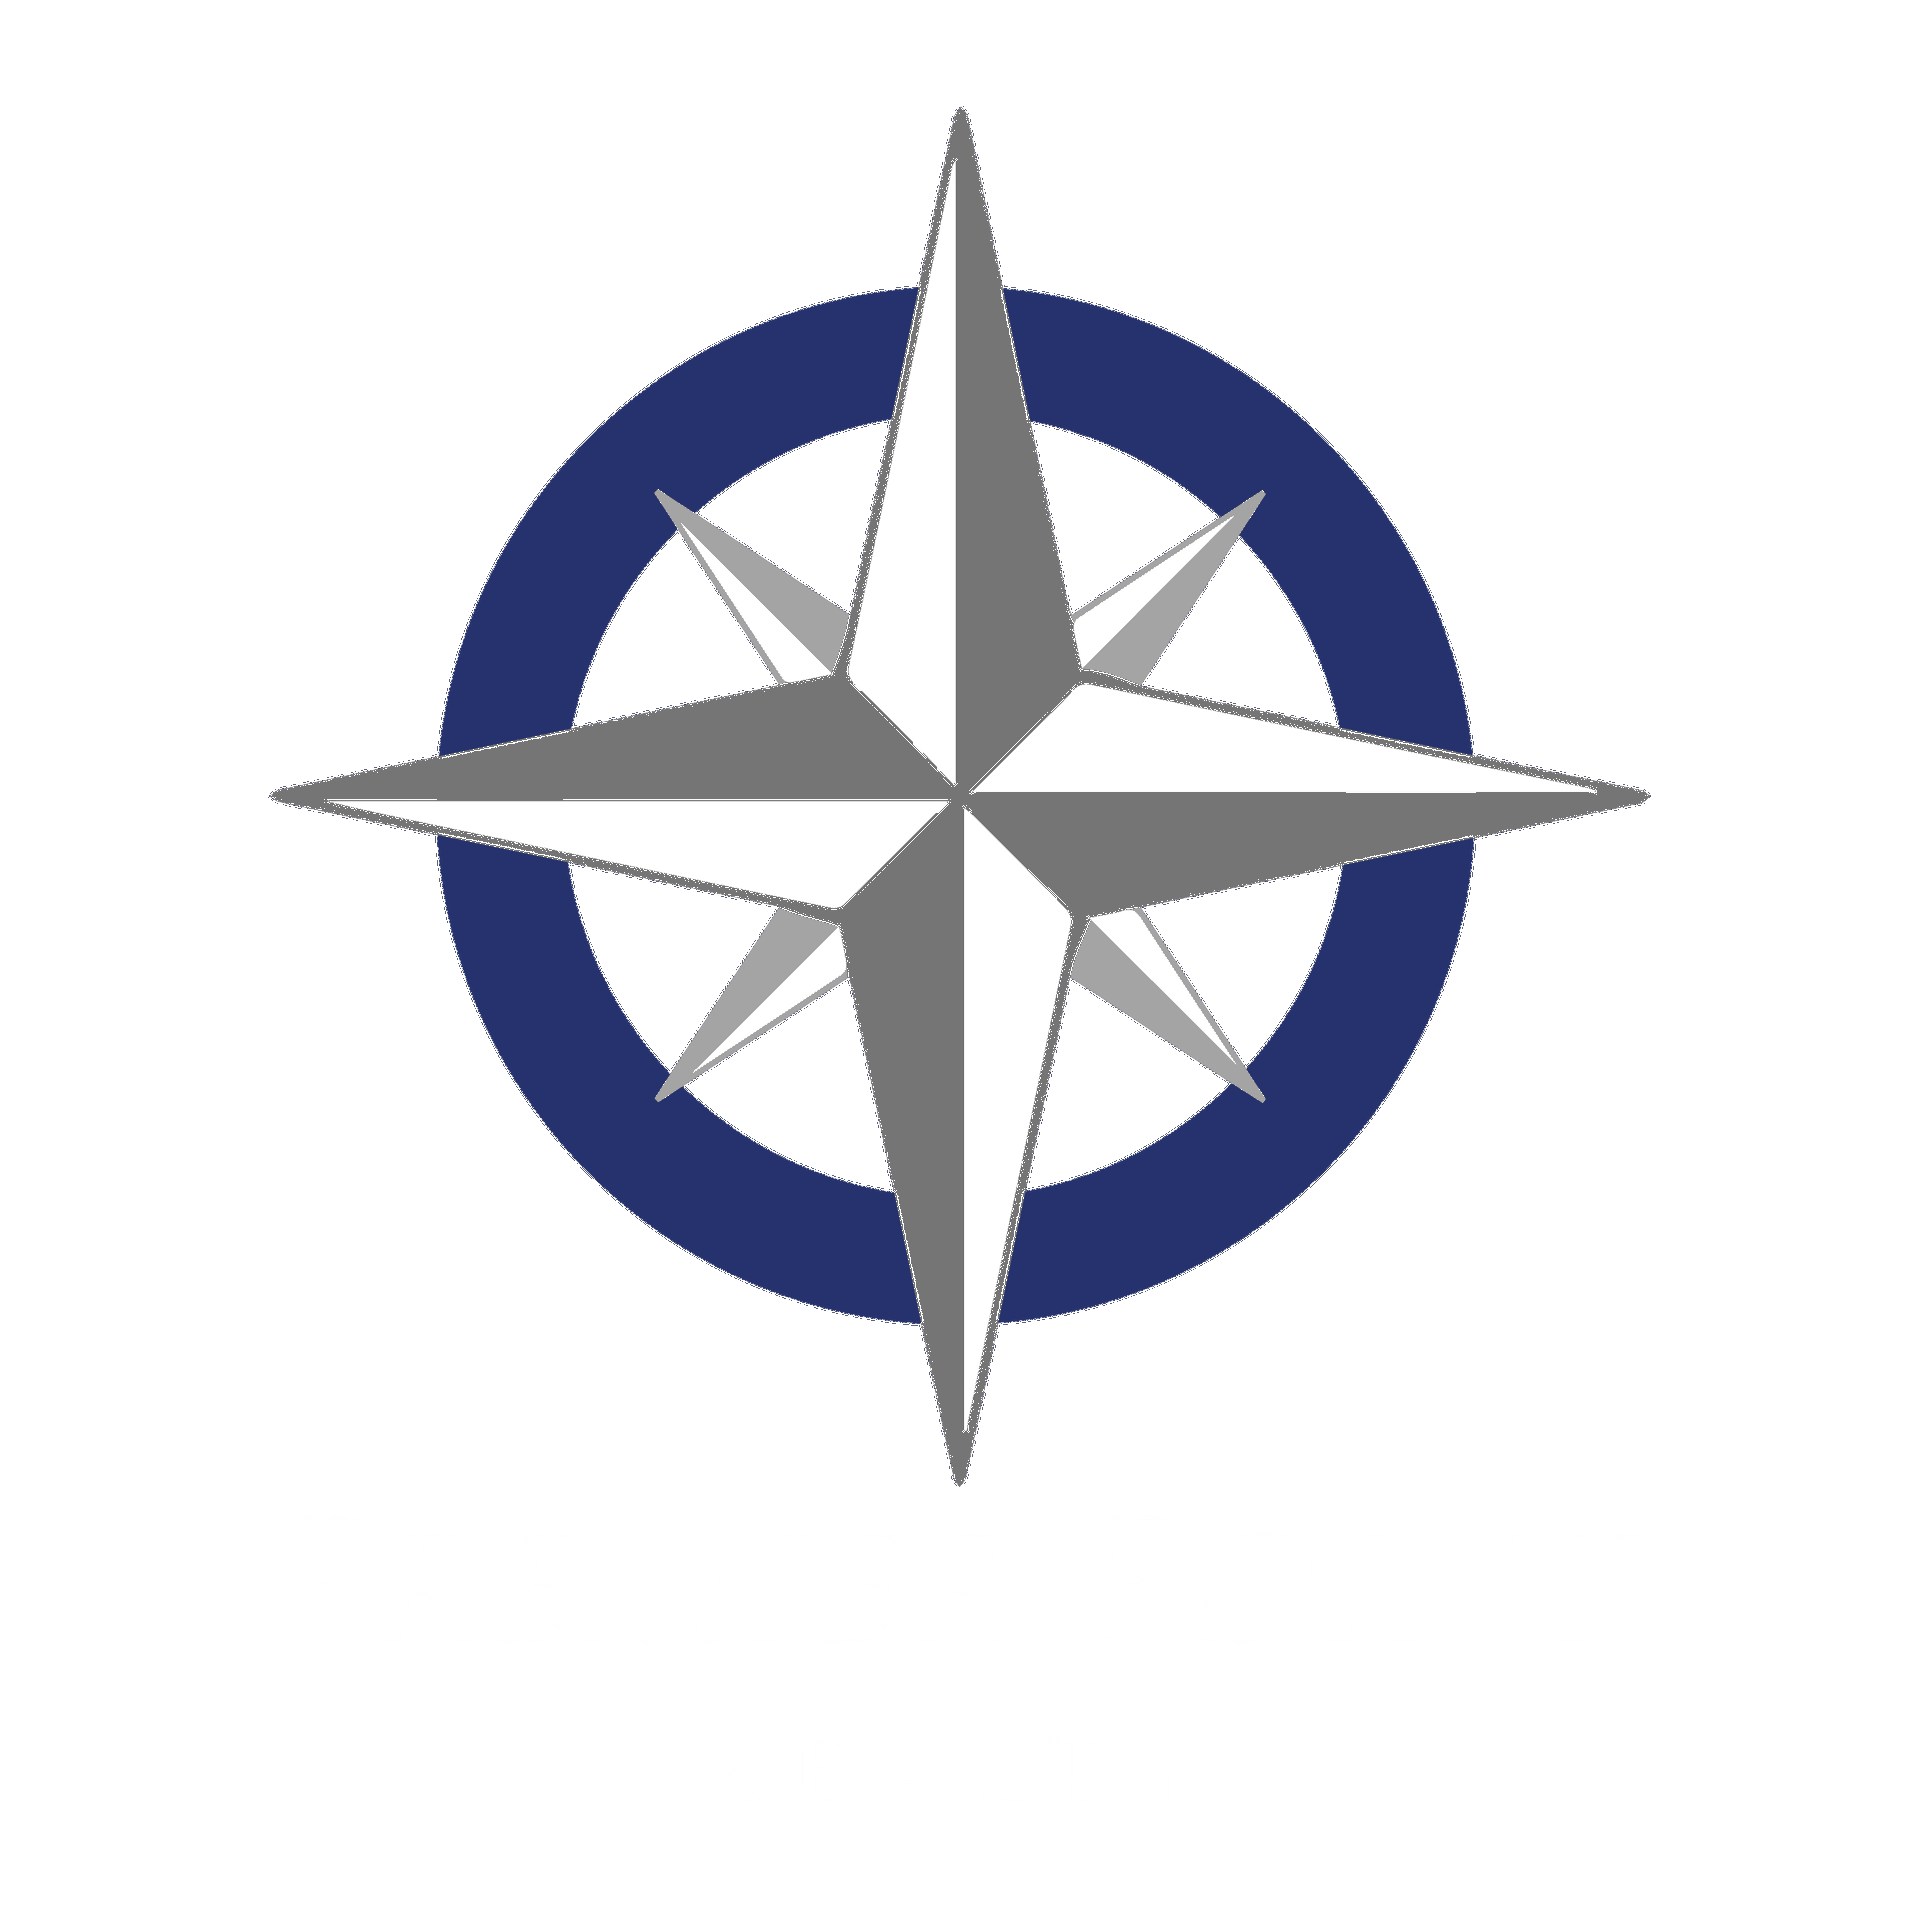 Premier Point Realty